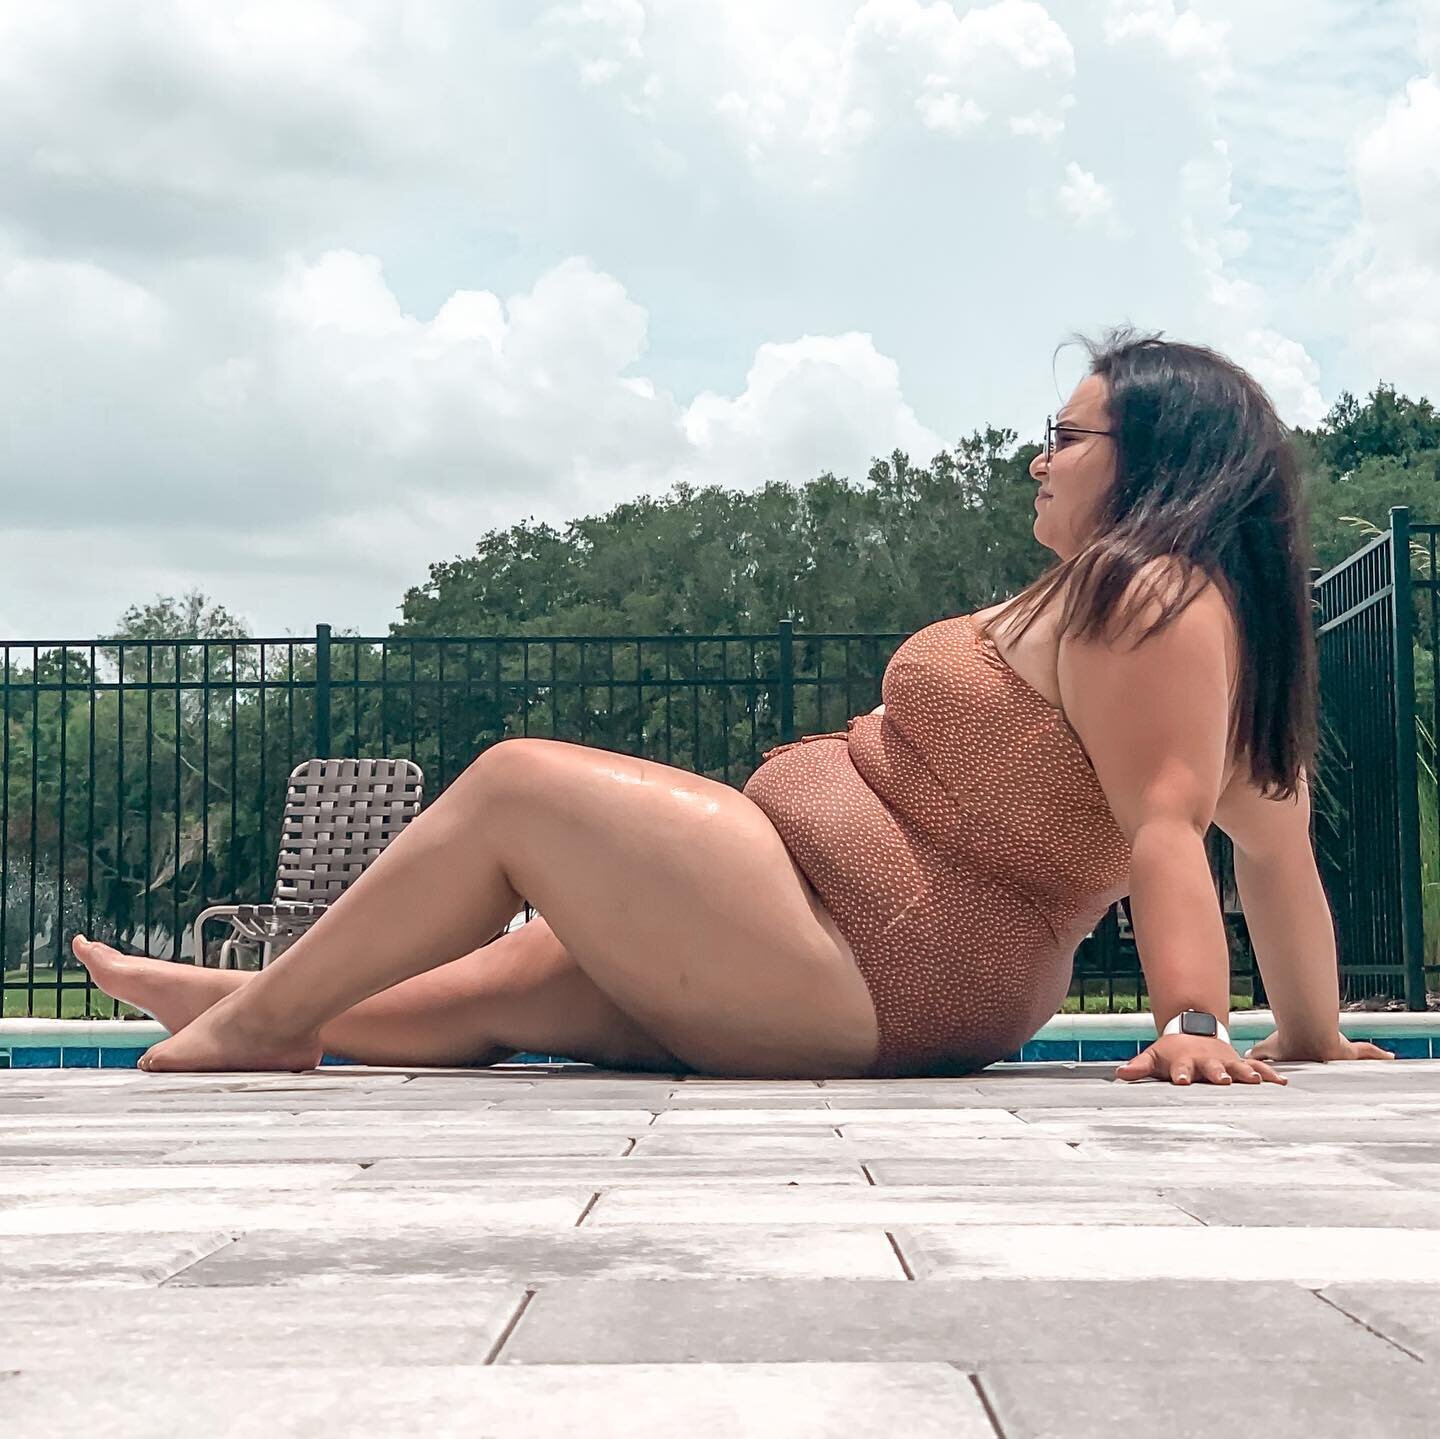 I would have died miserable.

Today I was sitting out by the pool enjoying the three minutes of sunshine when a thought crossed my mind. Right before I started my blog I had just gained a bunch of weight, moved into a crappy one bedroom apartment I h